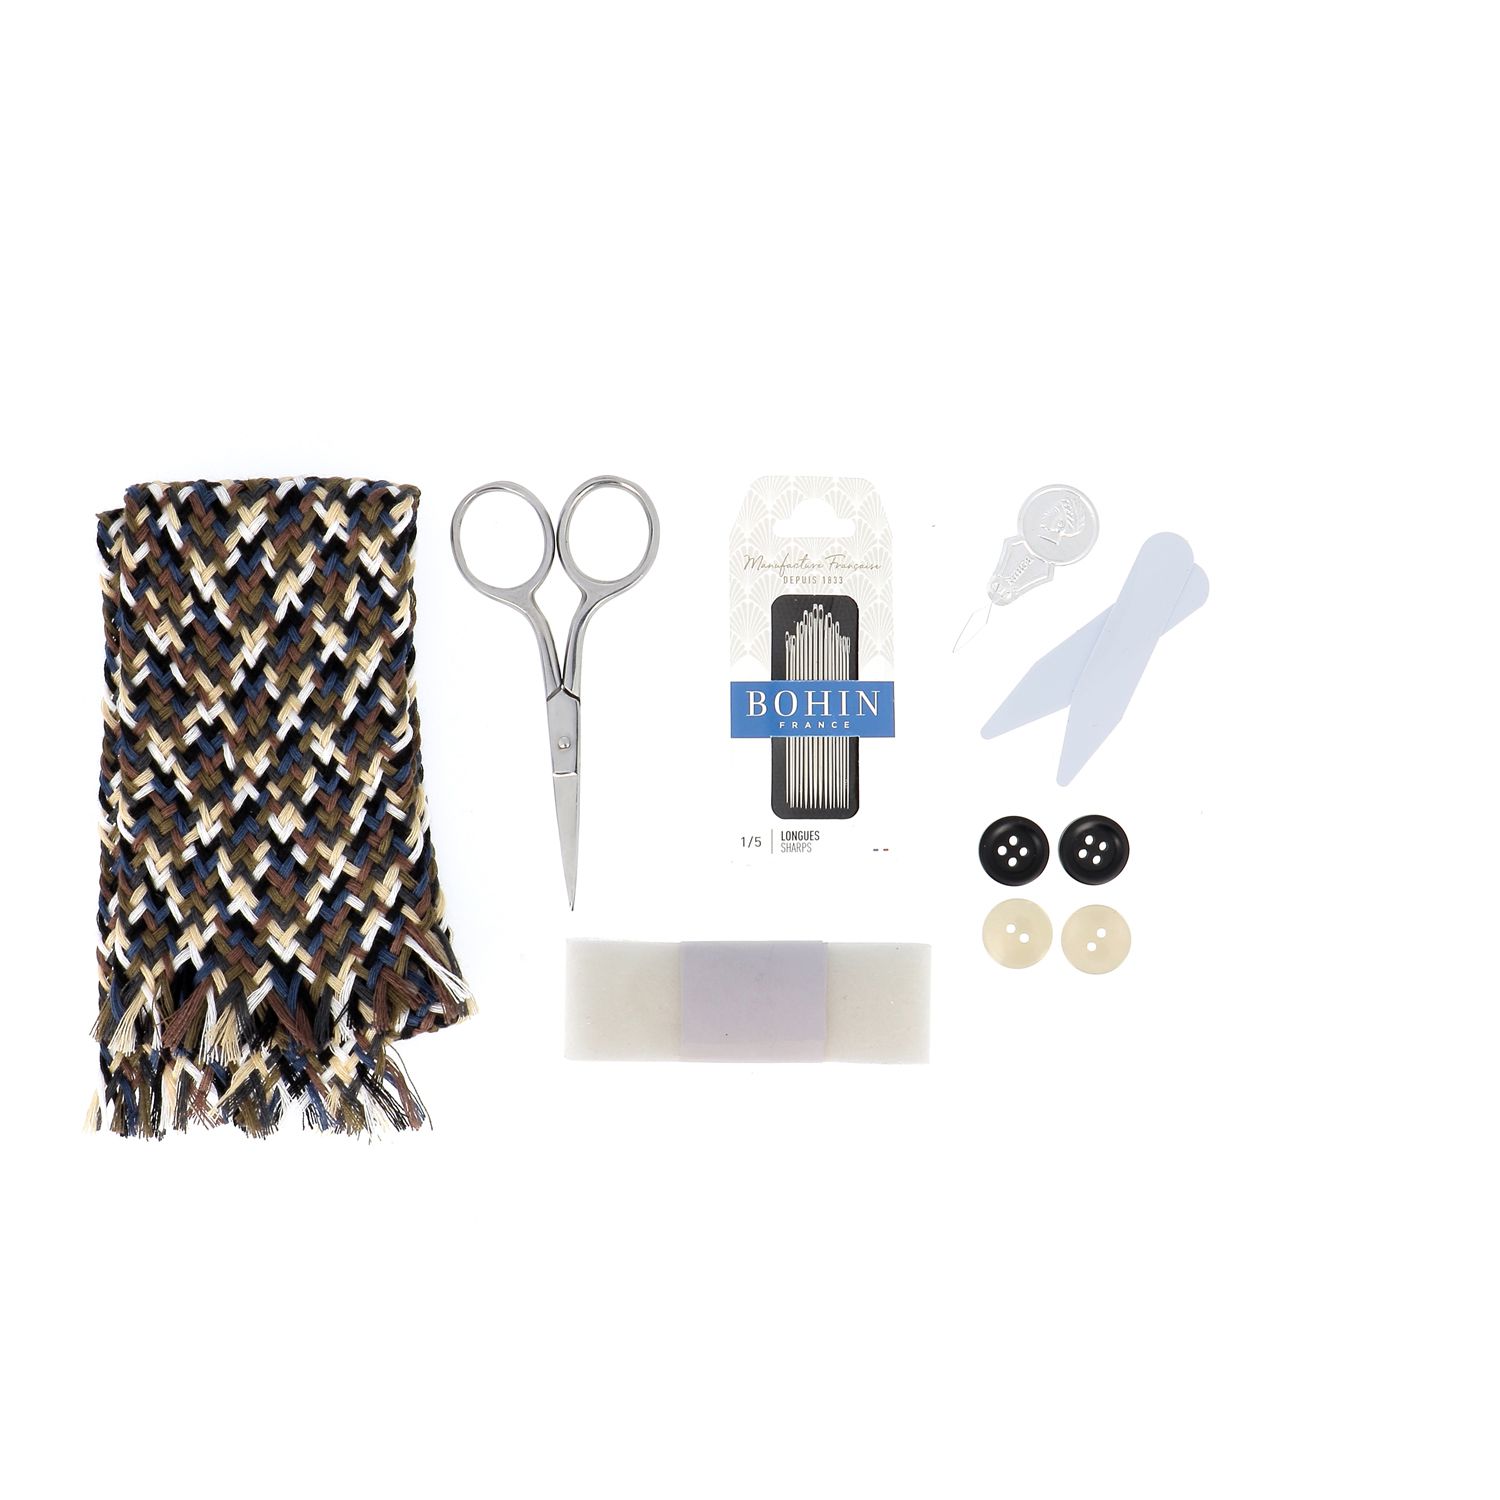 Sewing accessories included in the sewing kit for men